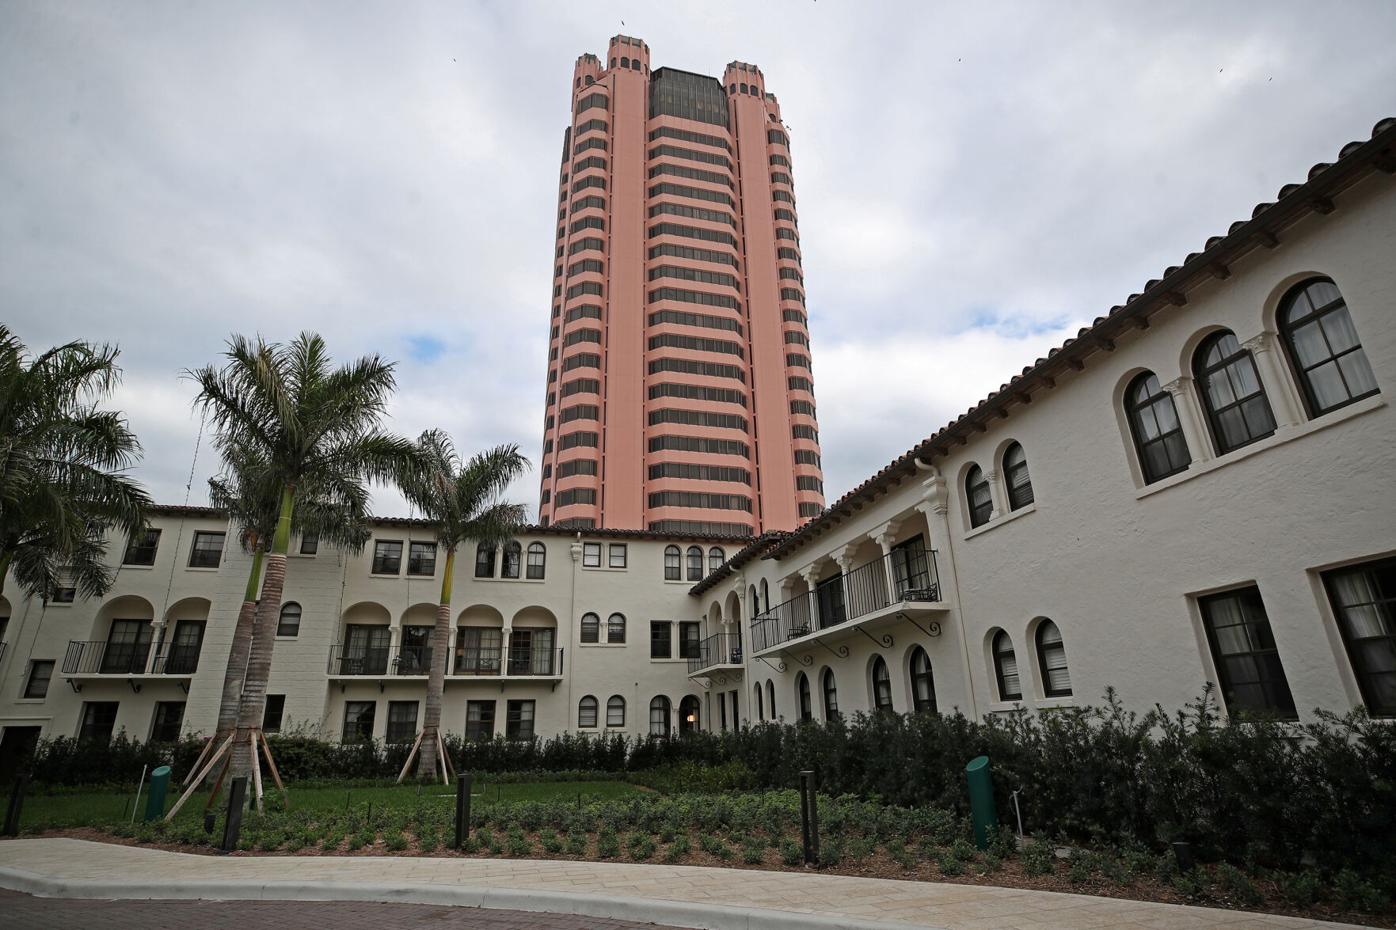 The luxury hotel tower at The Boca Raton